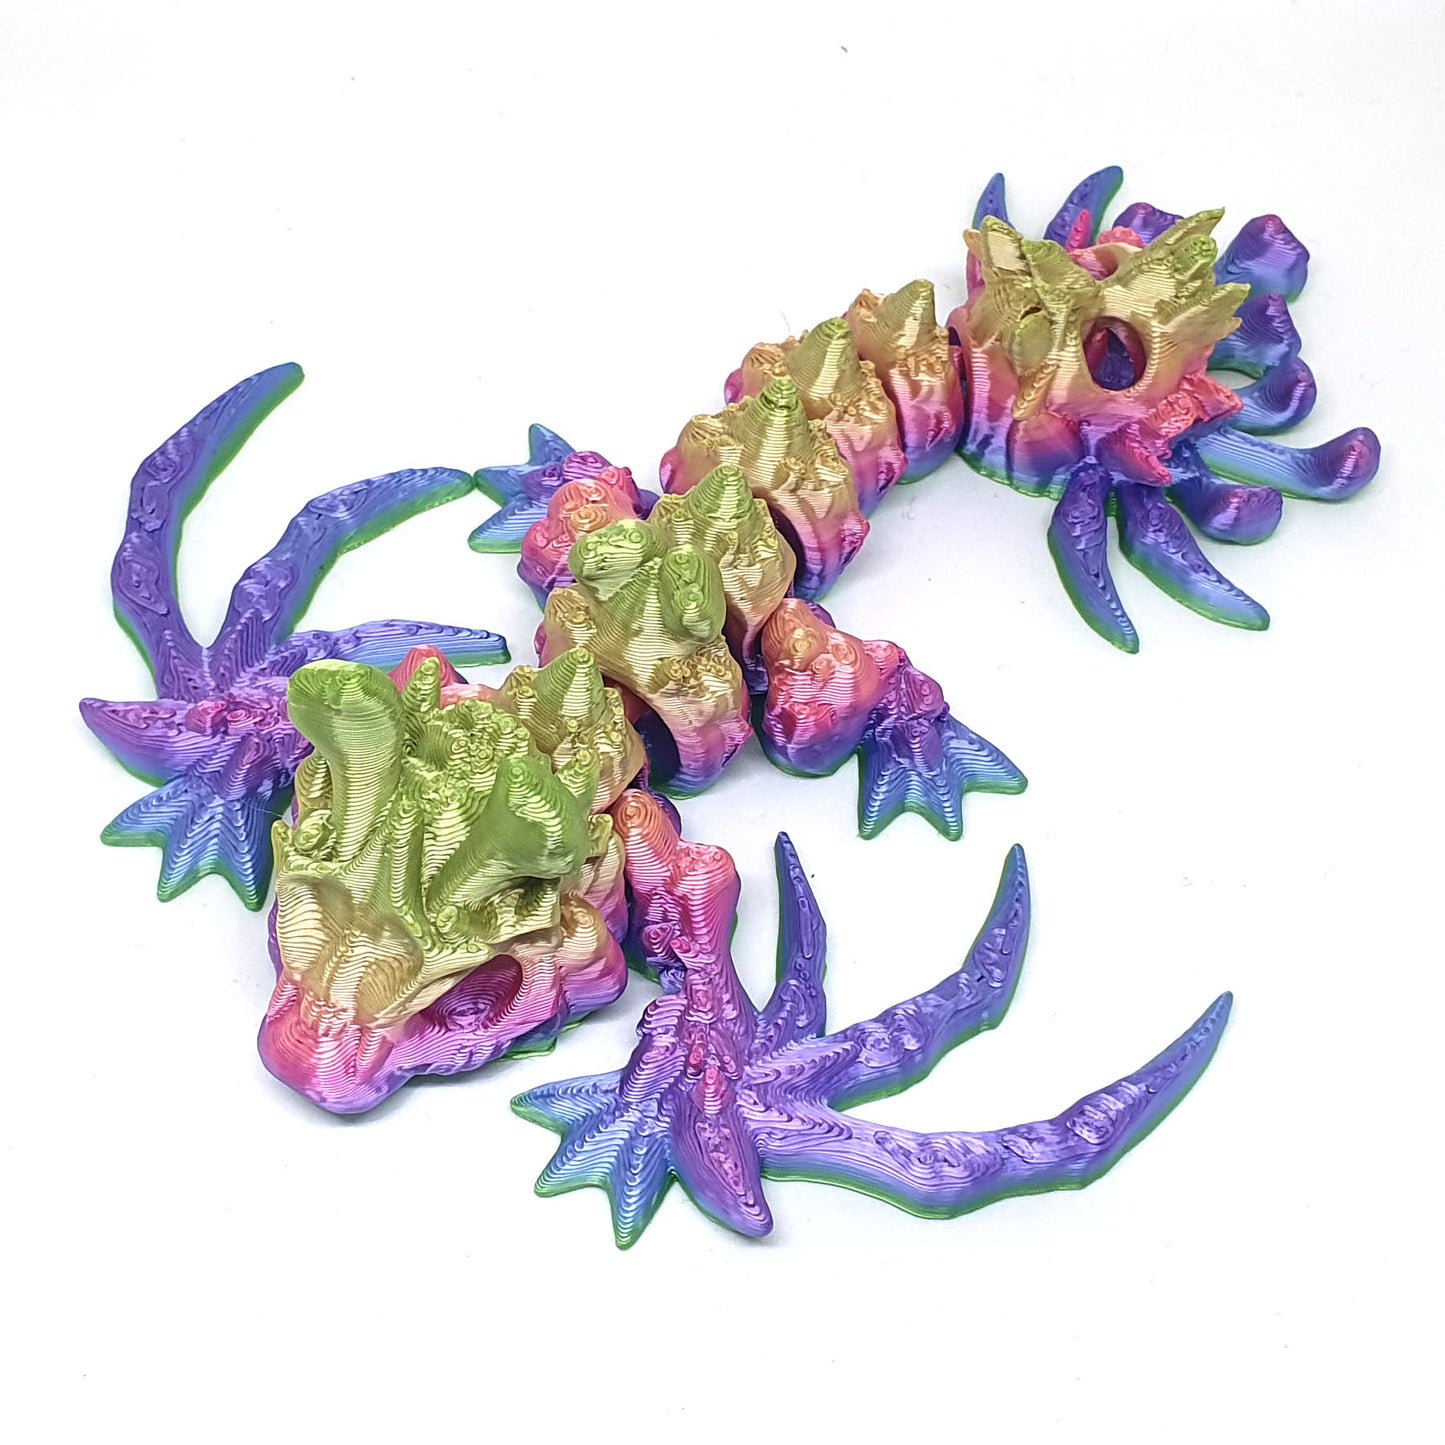 Hollow Wyvern Articulated Baby Dragon